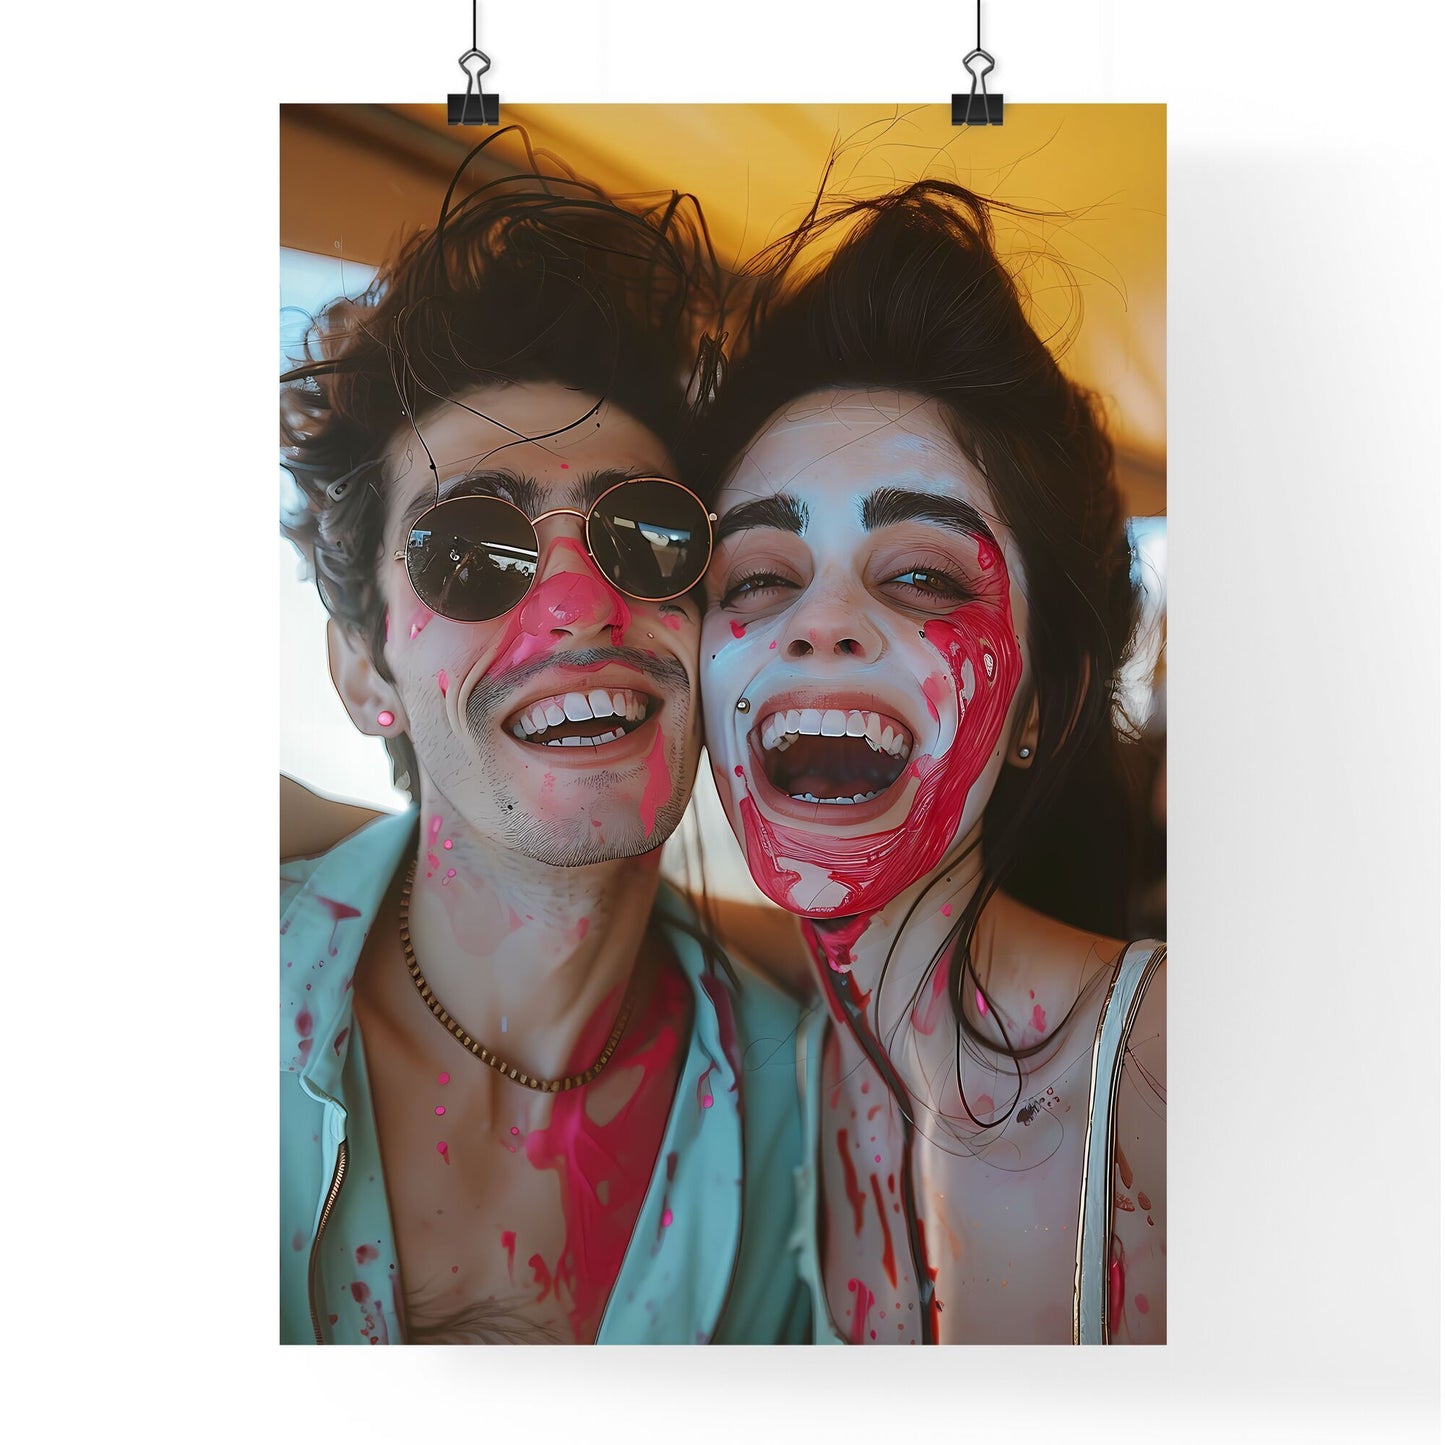 You are creating trigger phrases together to make it easier to access the fun personalities ;) #SchizoLove - a man and woman with paint on their faces Default Title